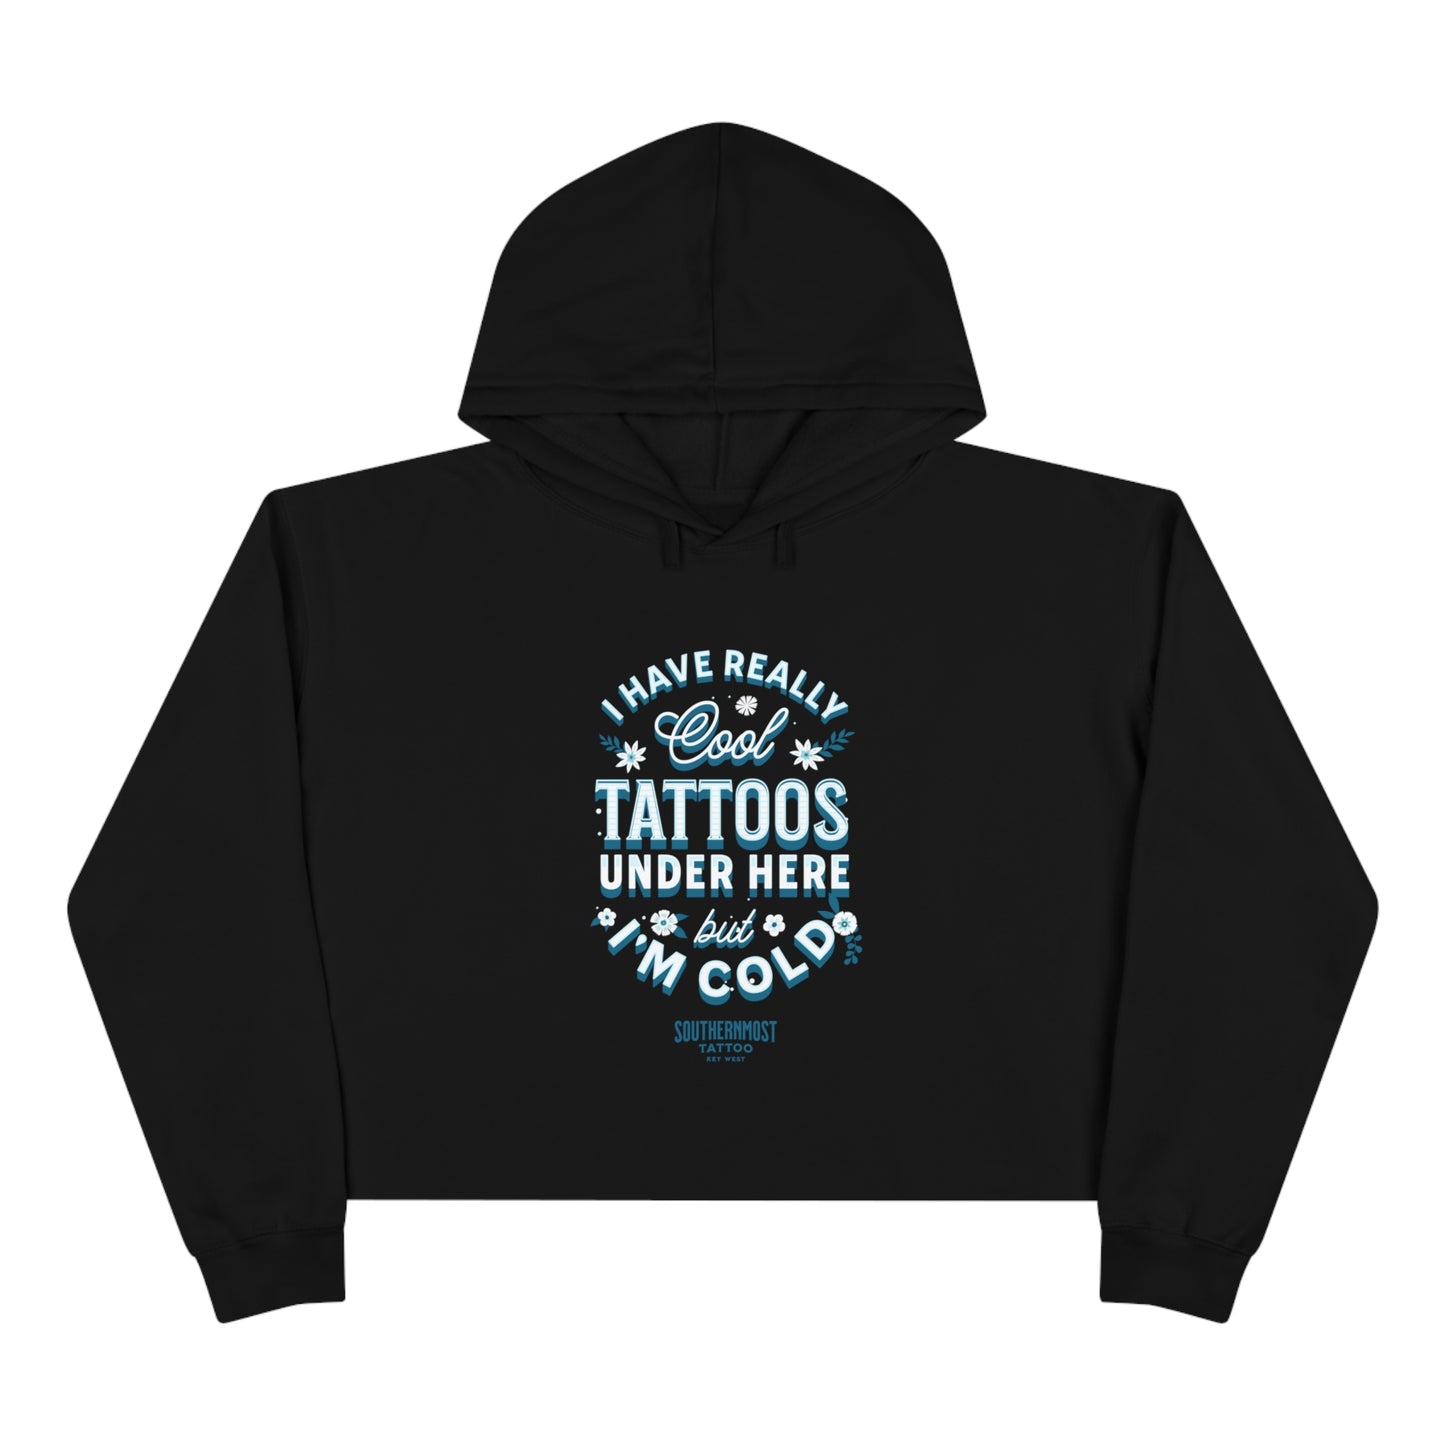 Southernmost Tattoo "Im Cold" Crop Hoodie